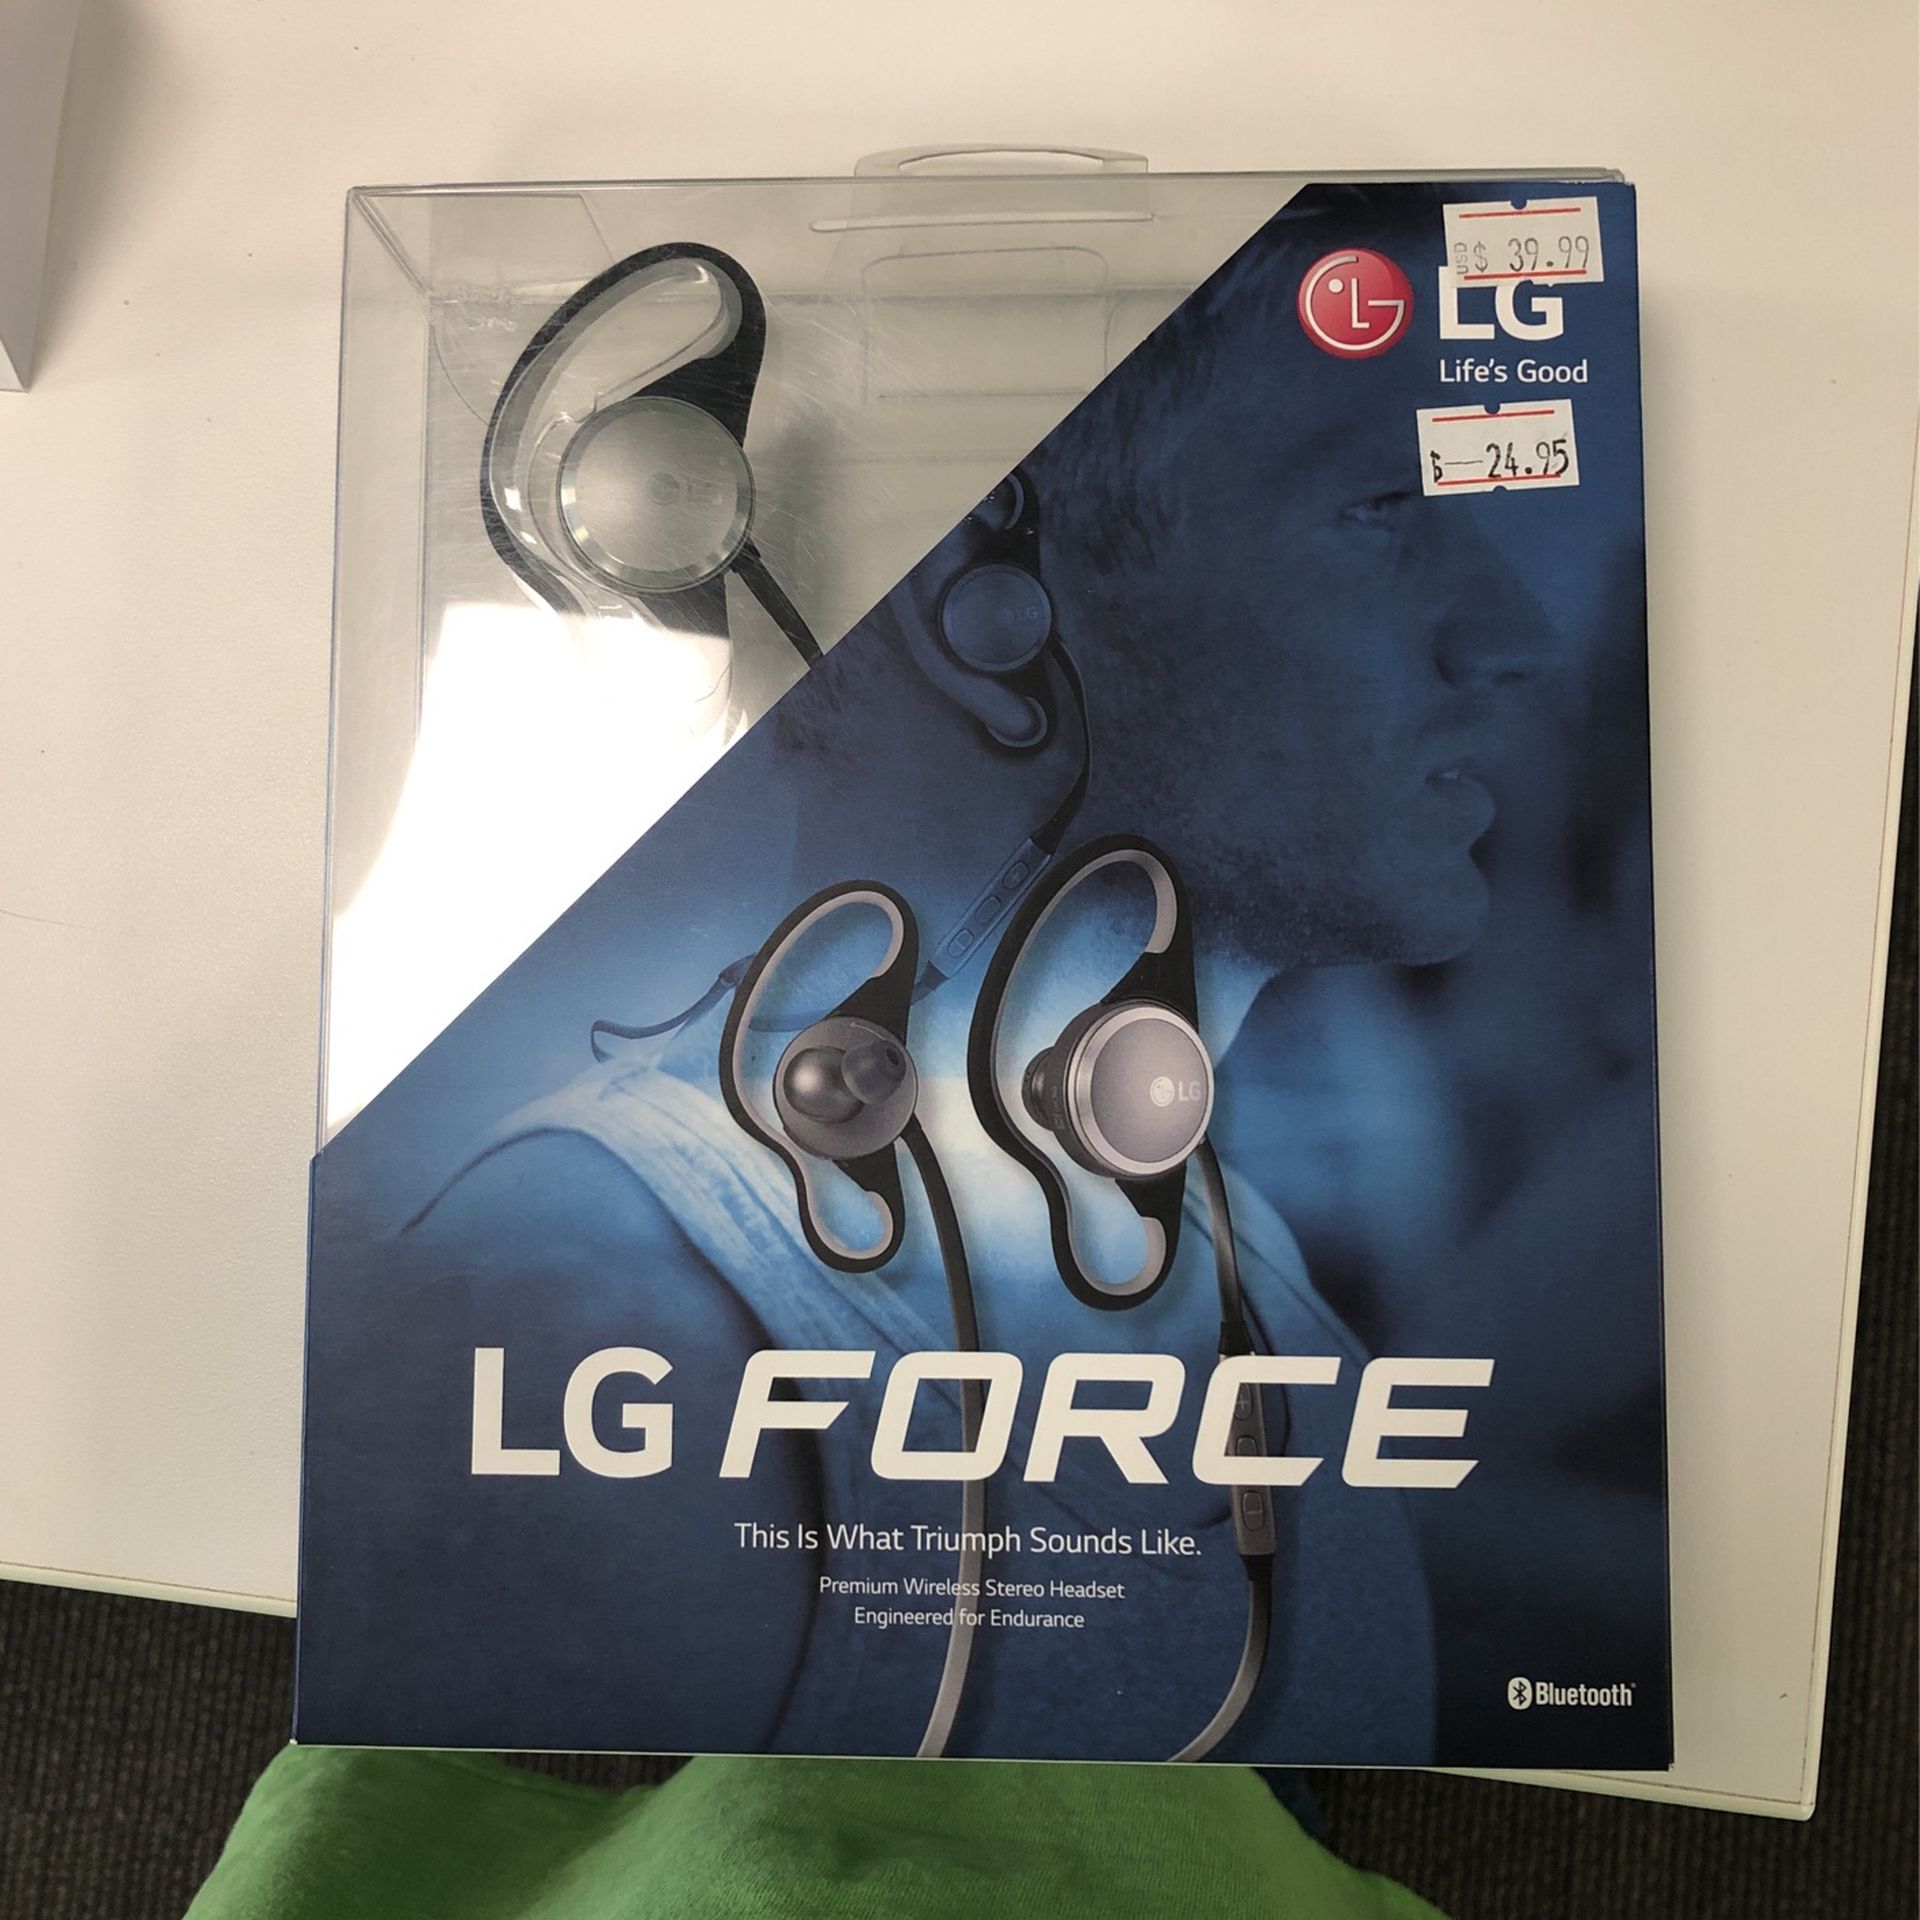 LG FORCE Wireless Stereo Headset